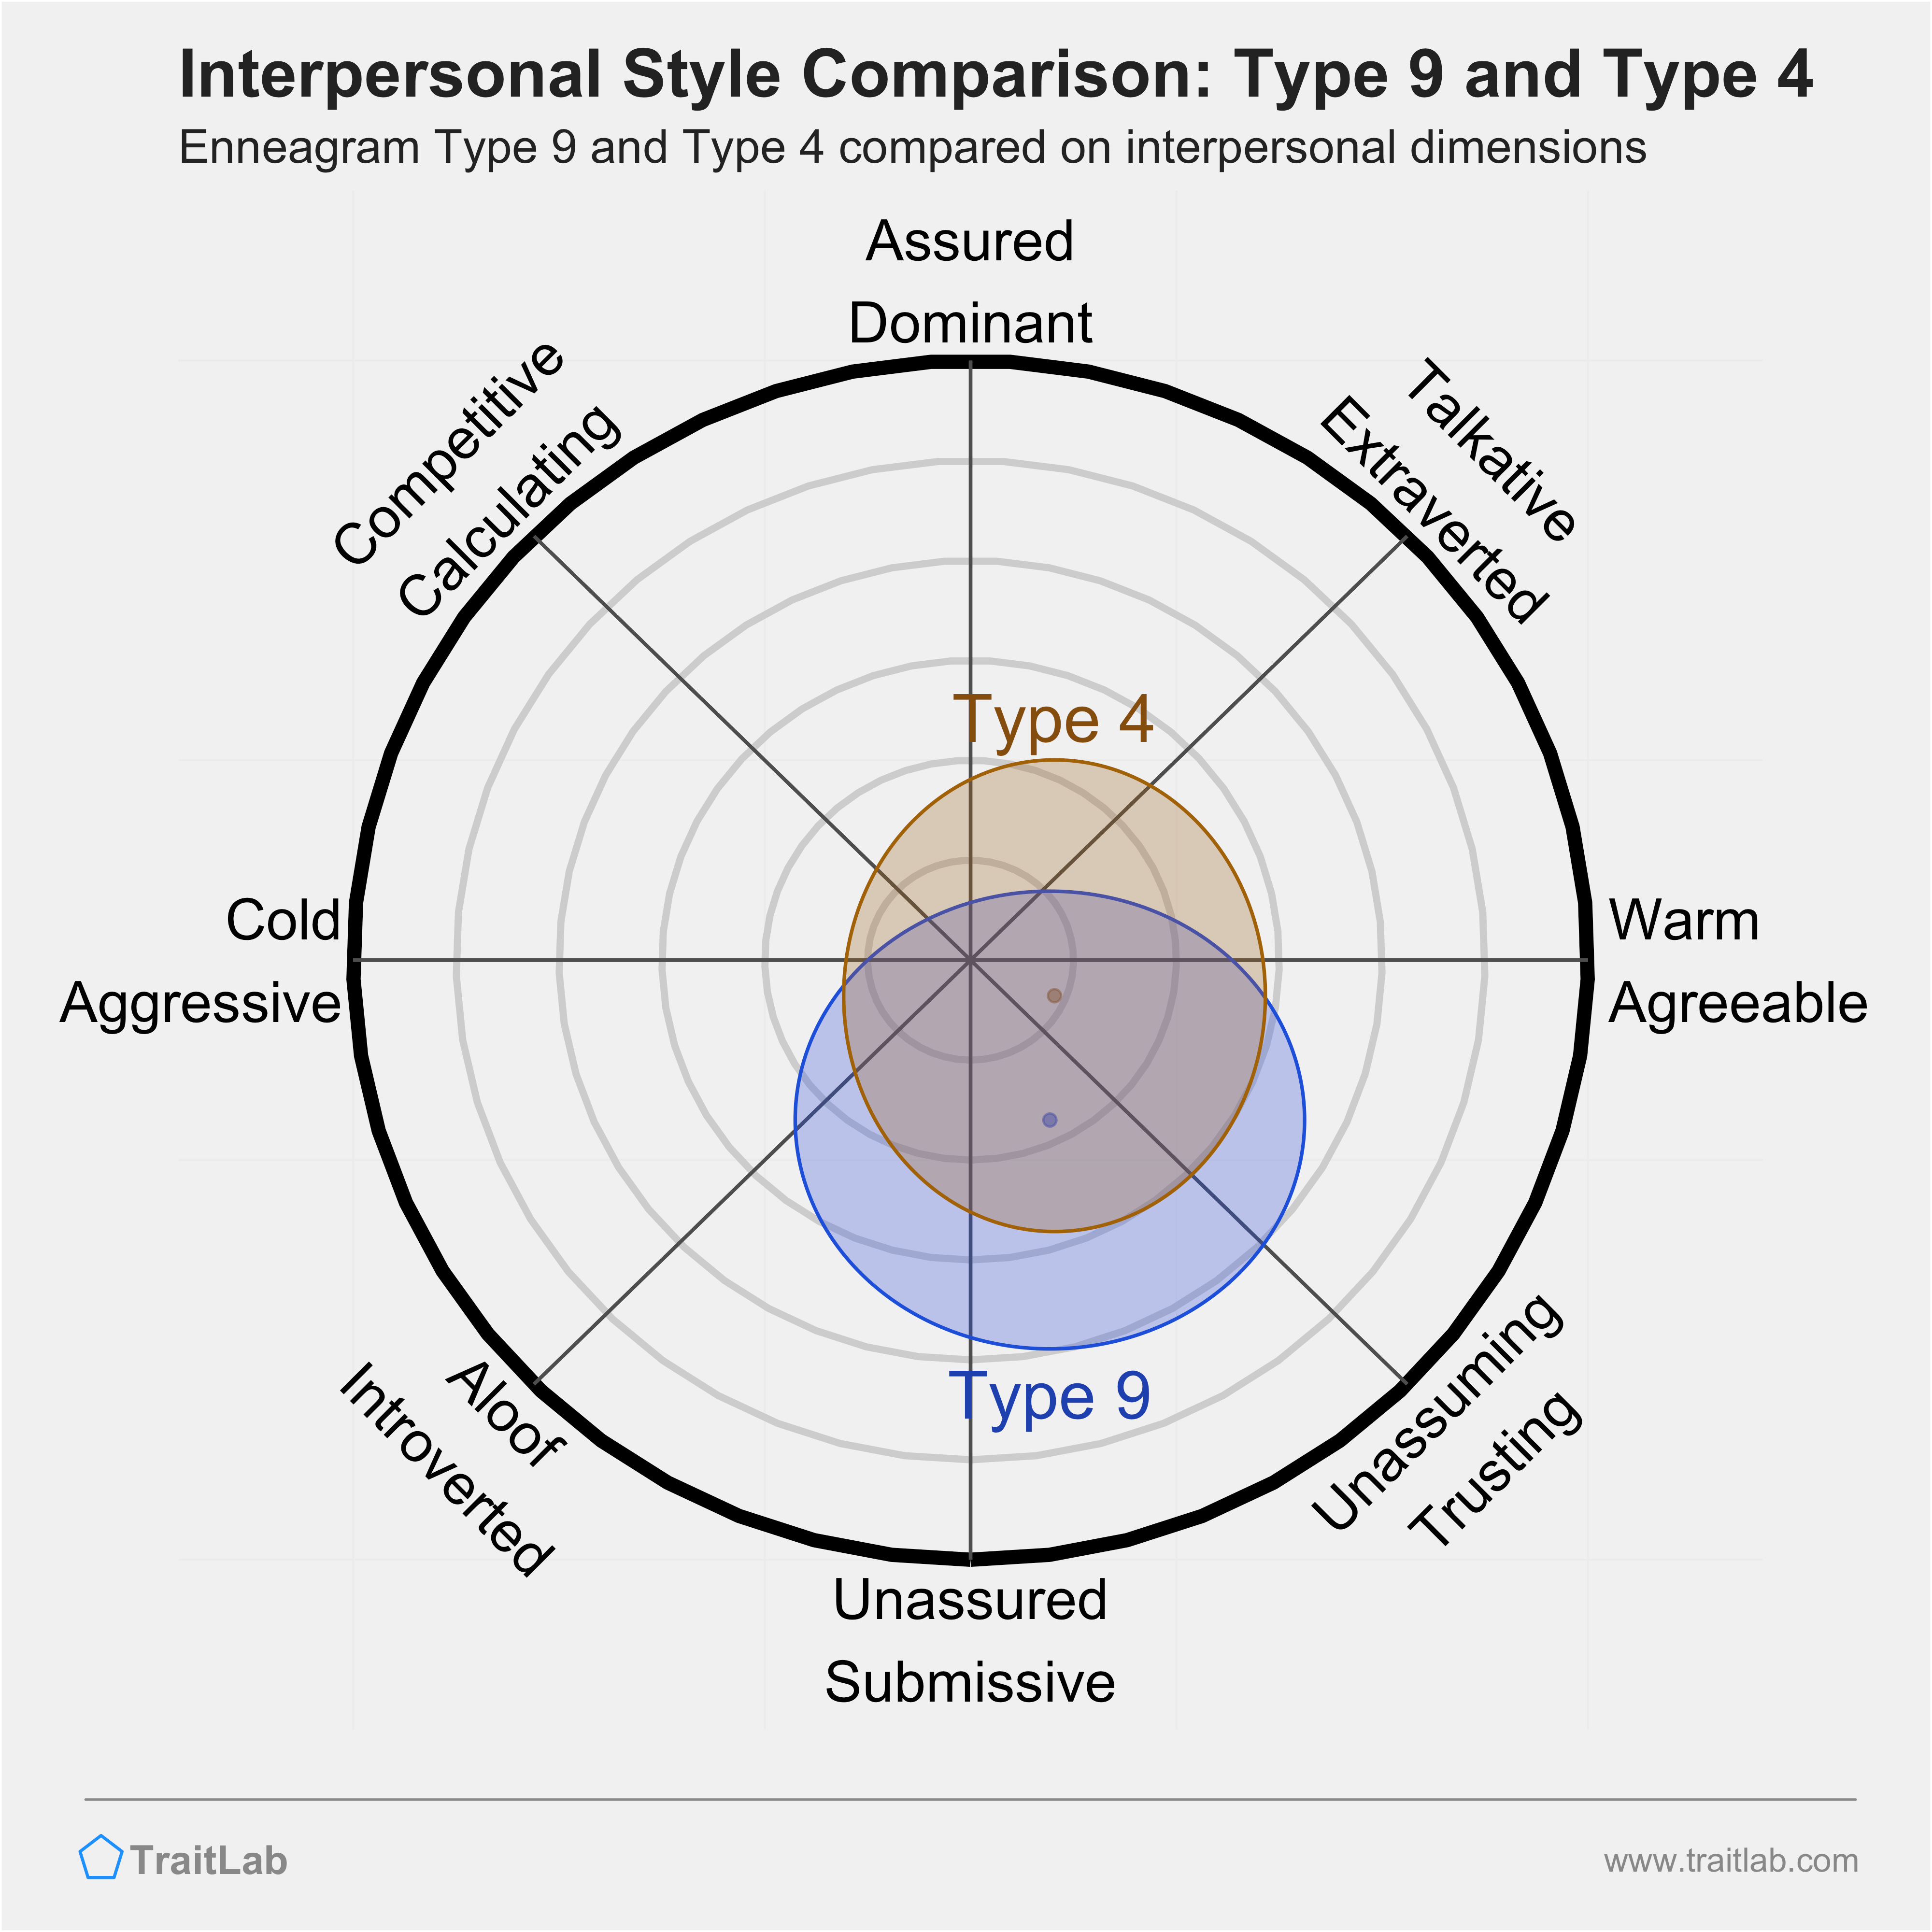 Enneagram Type 9 and Type 4 comparison across interpersonal dimensions